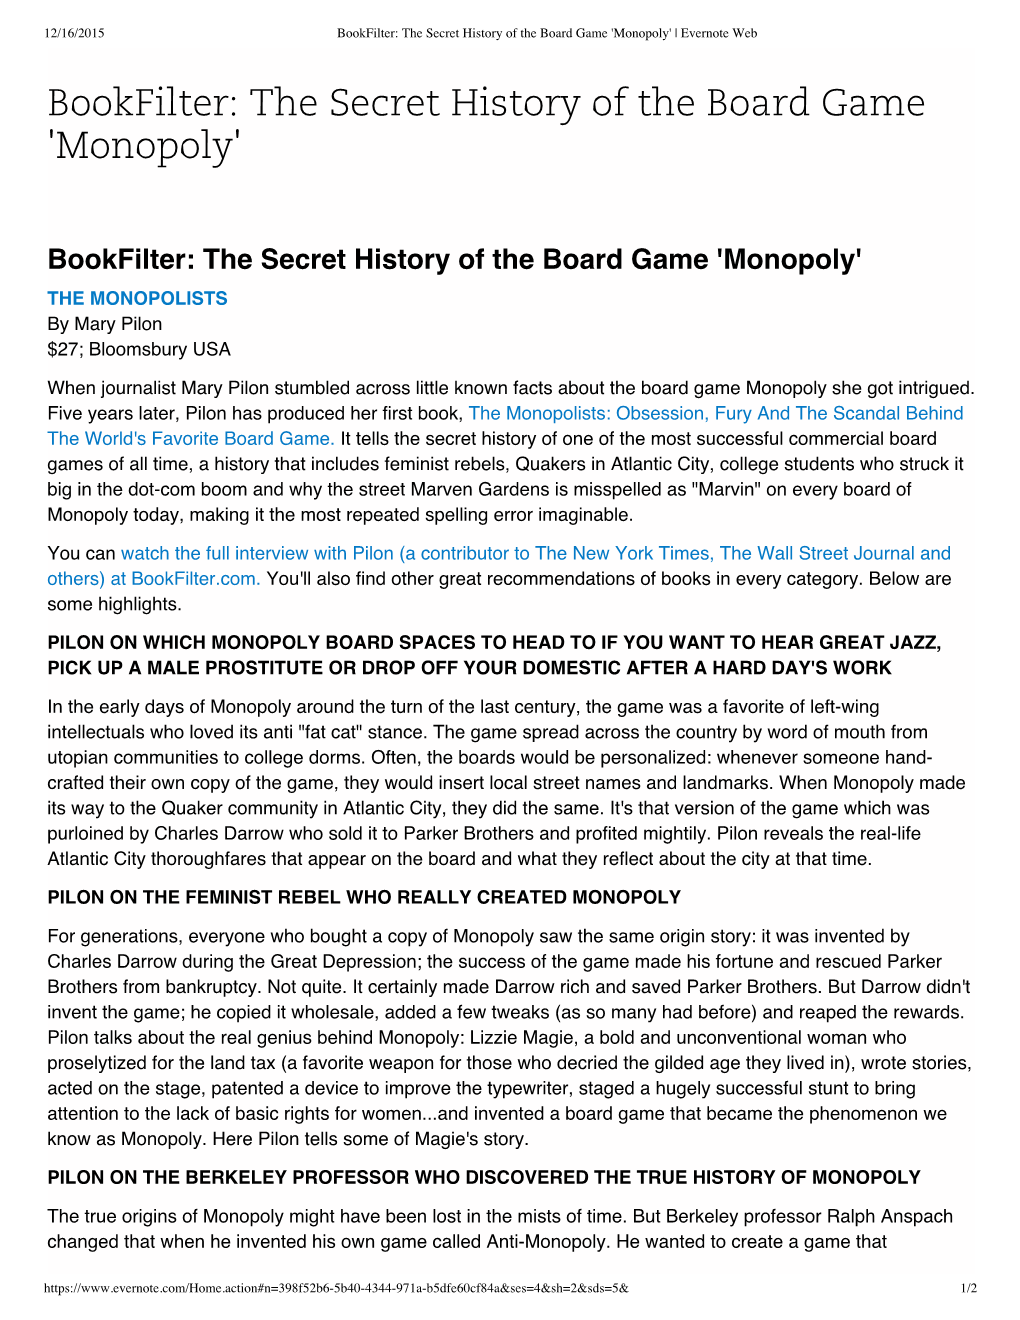 The Secret History of the Board Game 'Monopoly' | Evernote Web